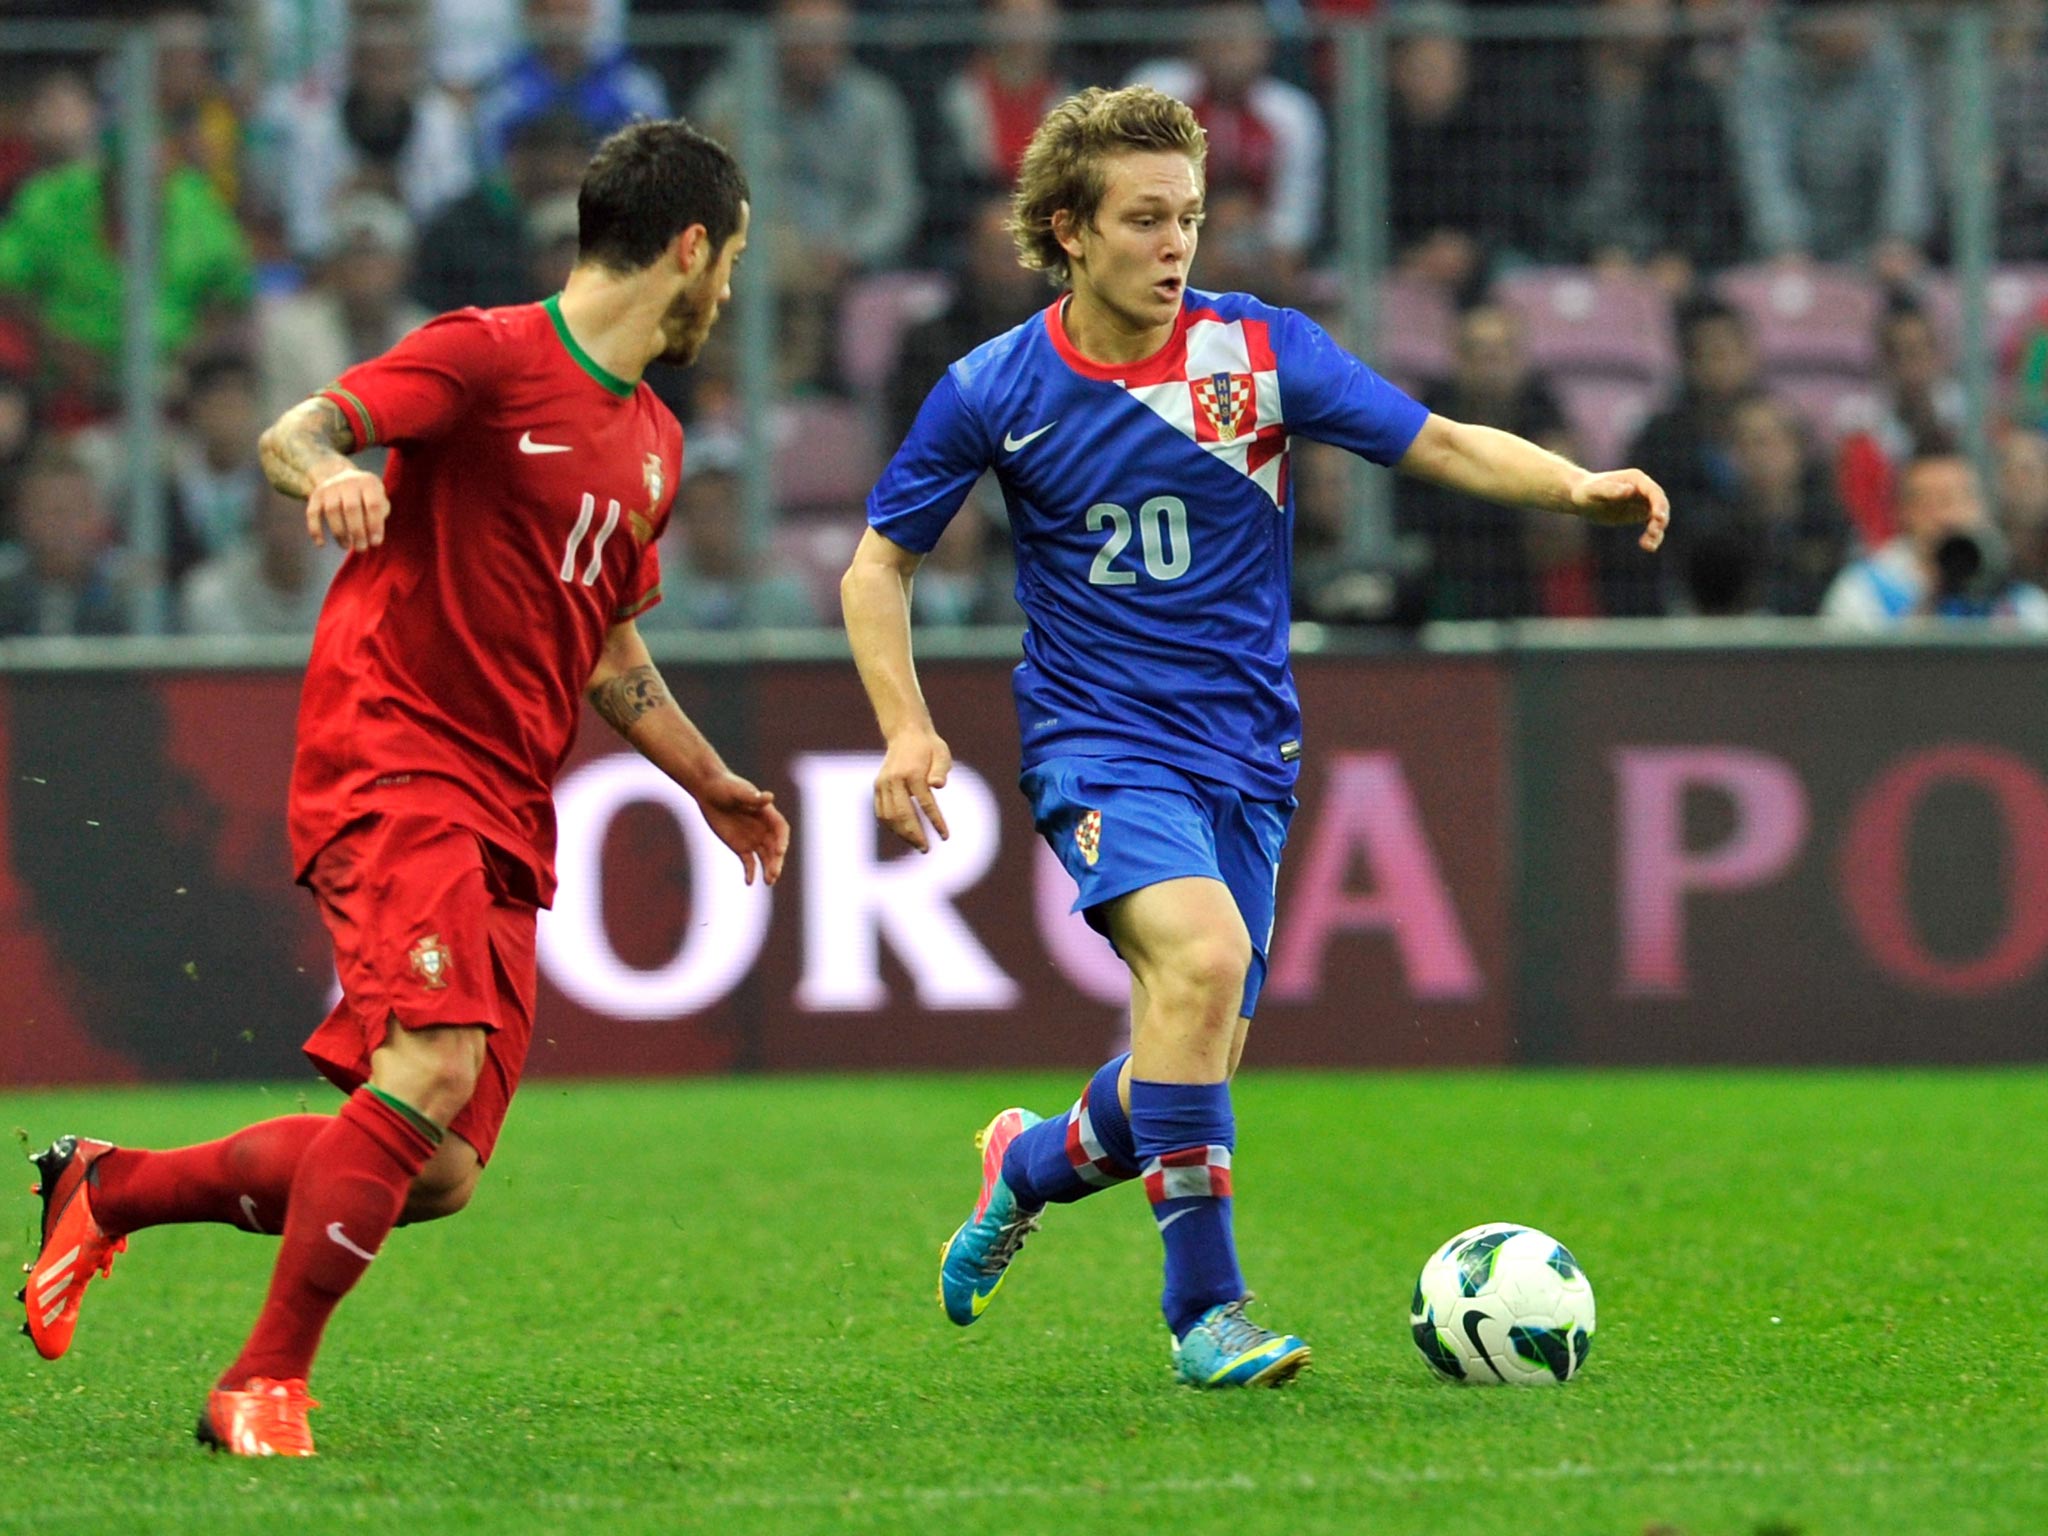 Alen Halilovic has agreed to join Barcelona from Dinamo Zagreb in the summer